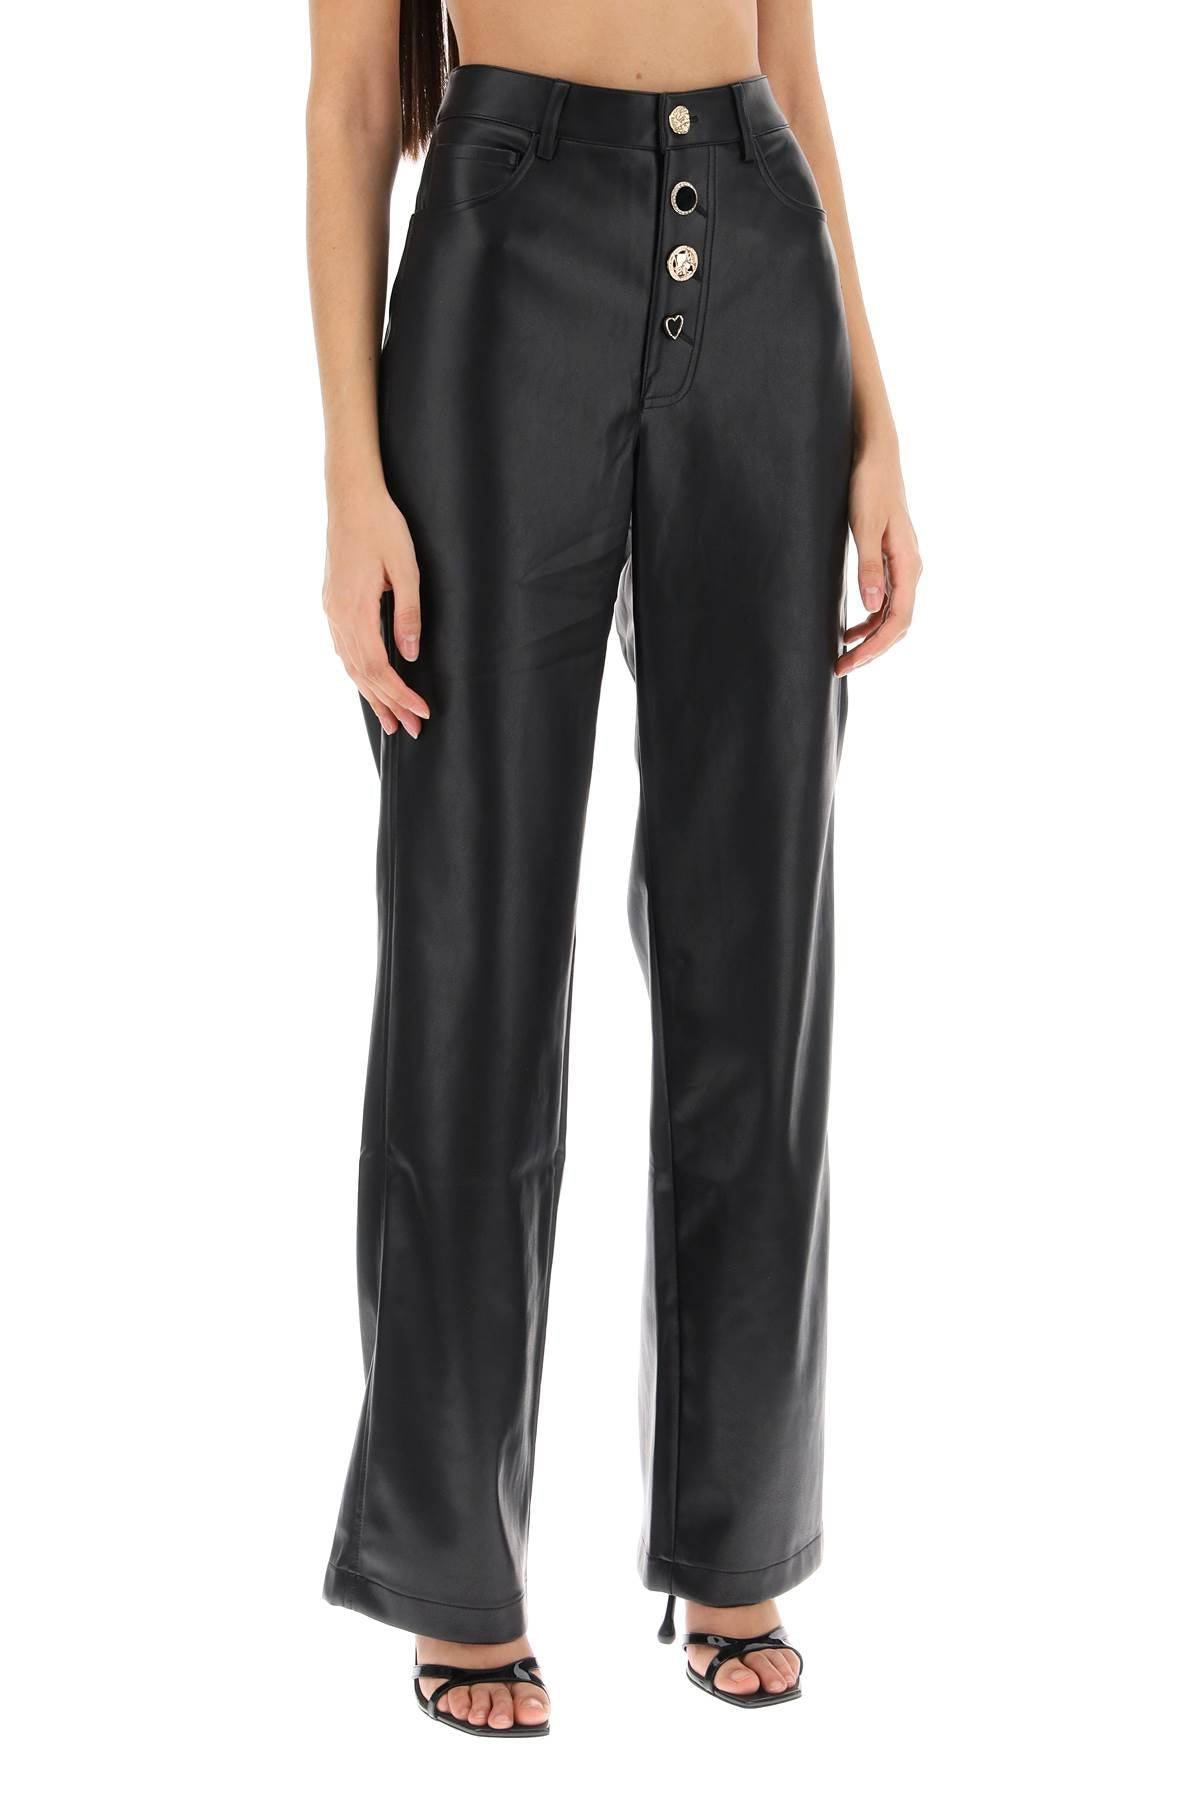 Rotate embellished button faux leather pants-women > clothing > trousers-Rotate-38-Black-Urbanheer